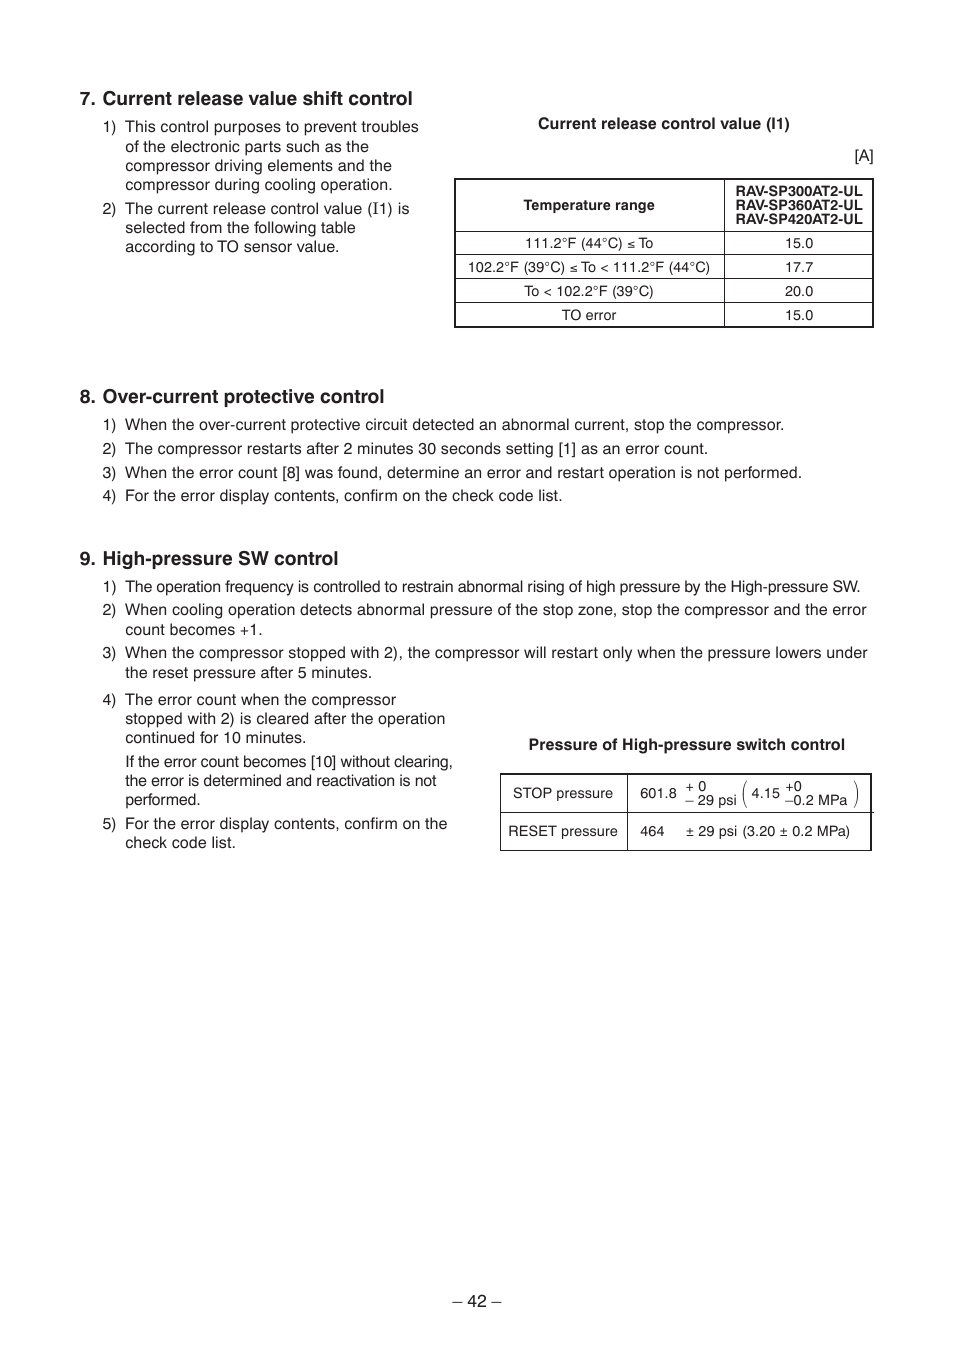 Over-current protective control, High-pressure sw control, Current release value shift control | Toshiba CARRIER RAV-SP300AT2-UL User Manual | Page 42 / 116